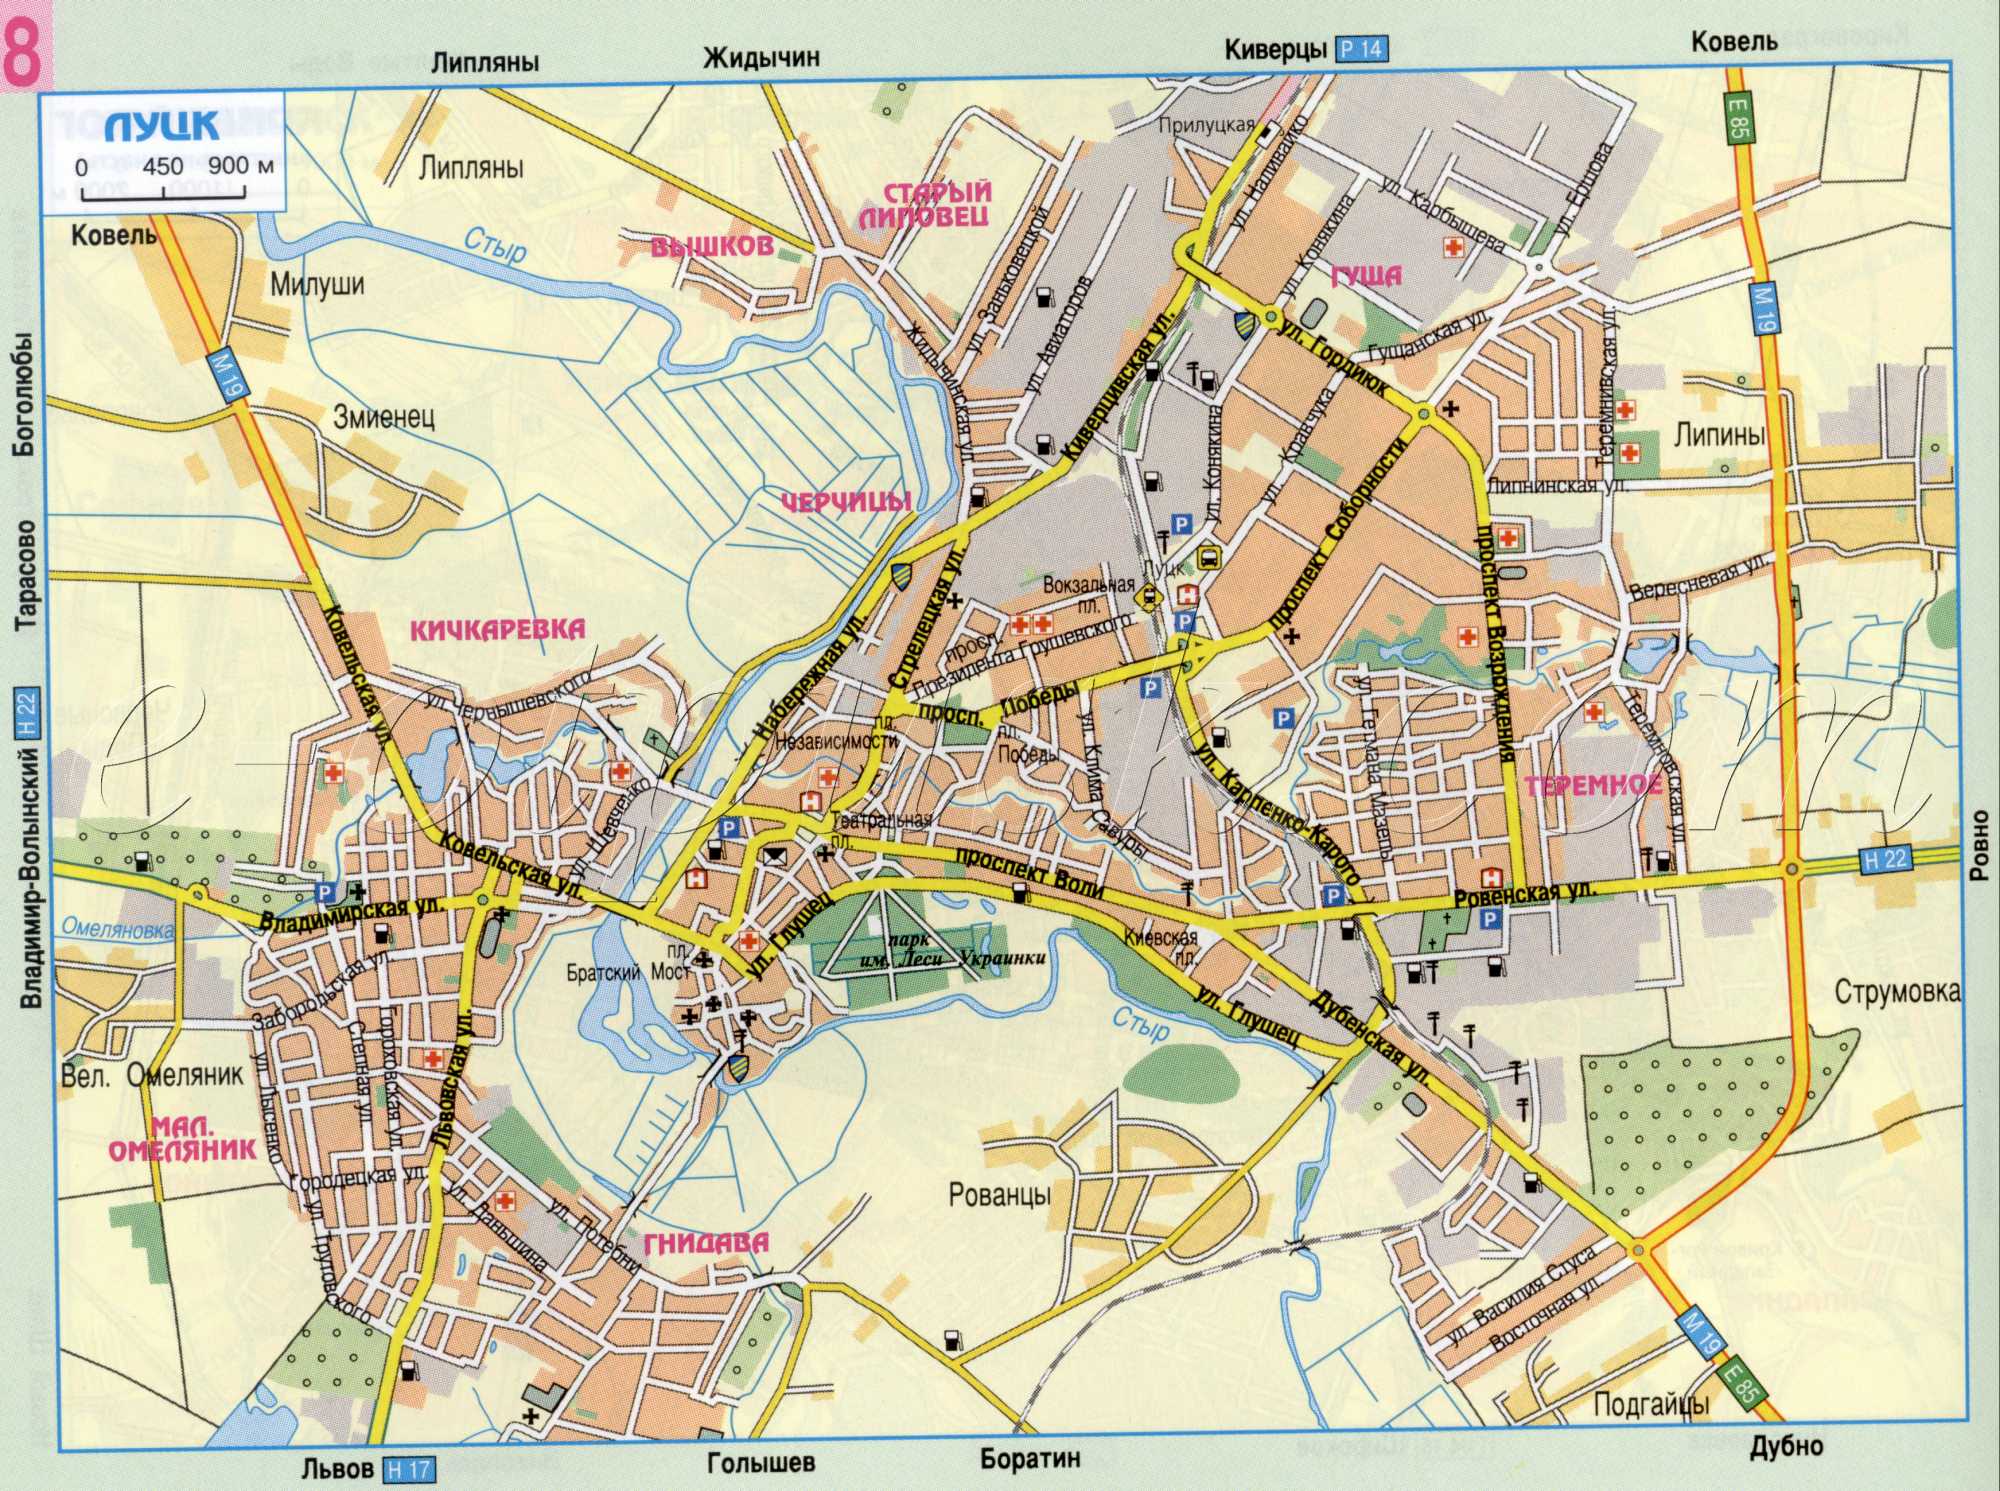 Lutsk Automobile map, directions through the city of Lutsk. Download for free